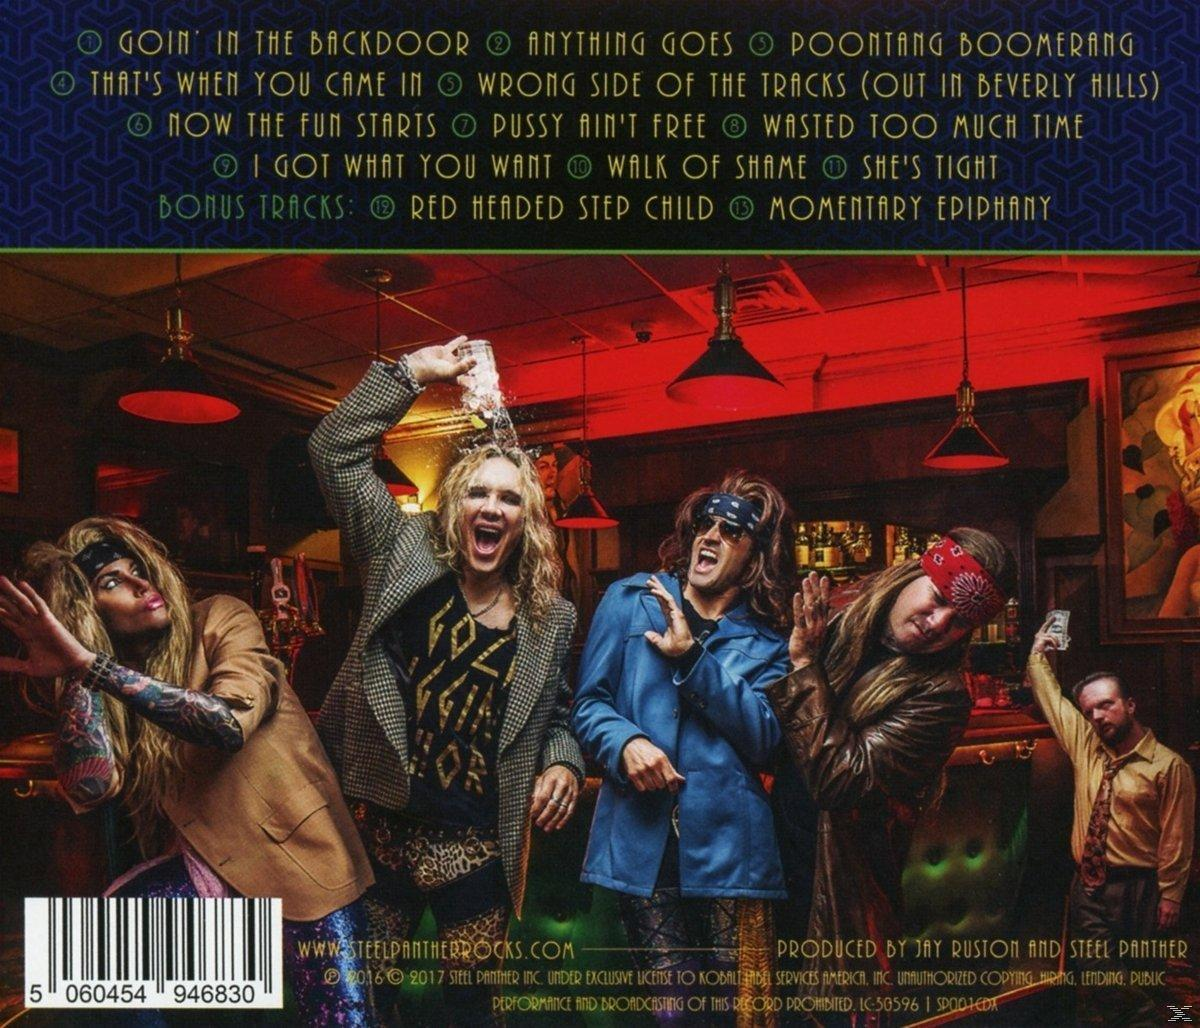 Steel Panther - LOWER THE (CD) (DELUXE EDITION) BAR 